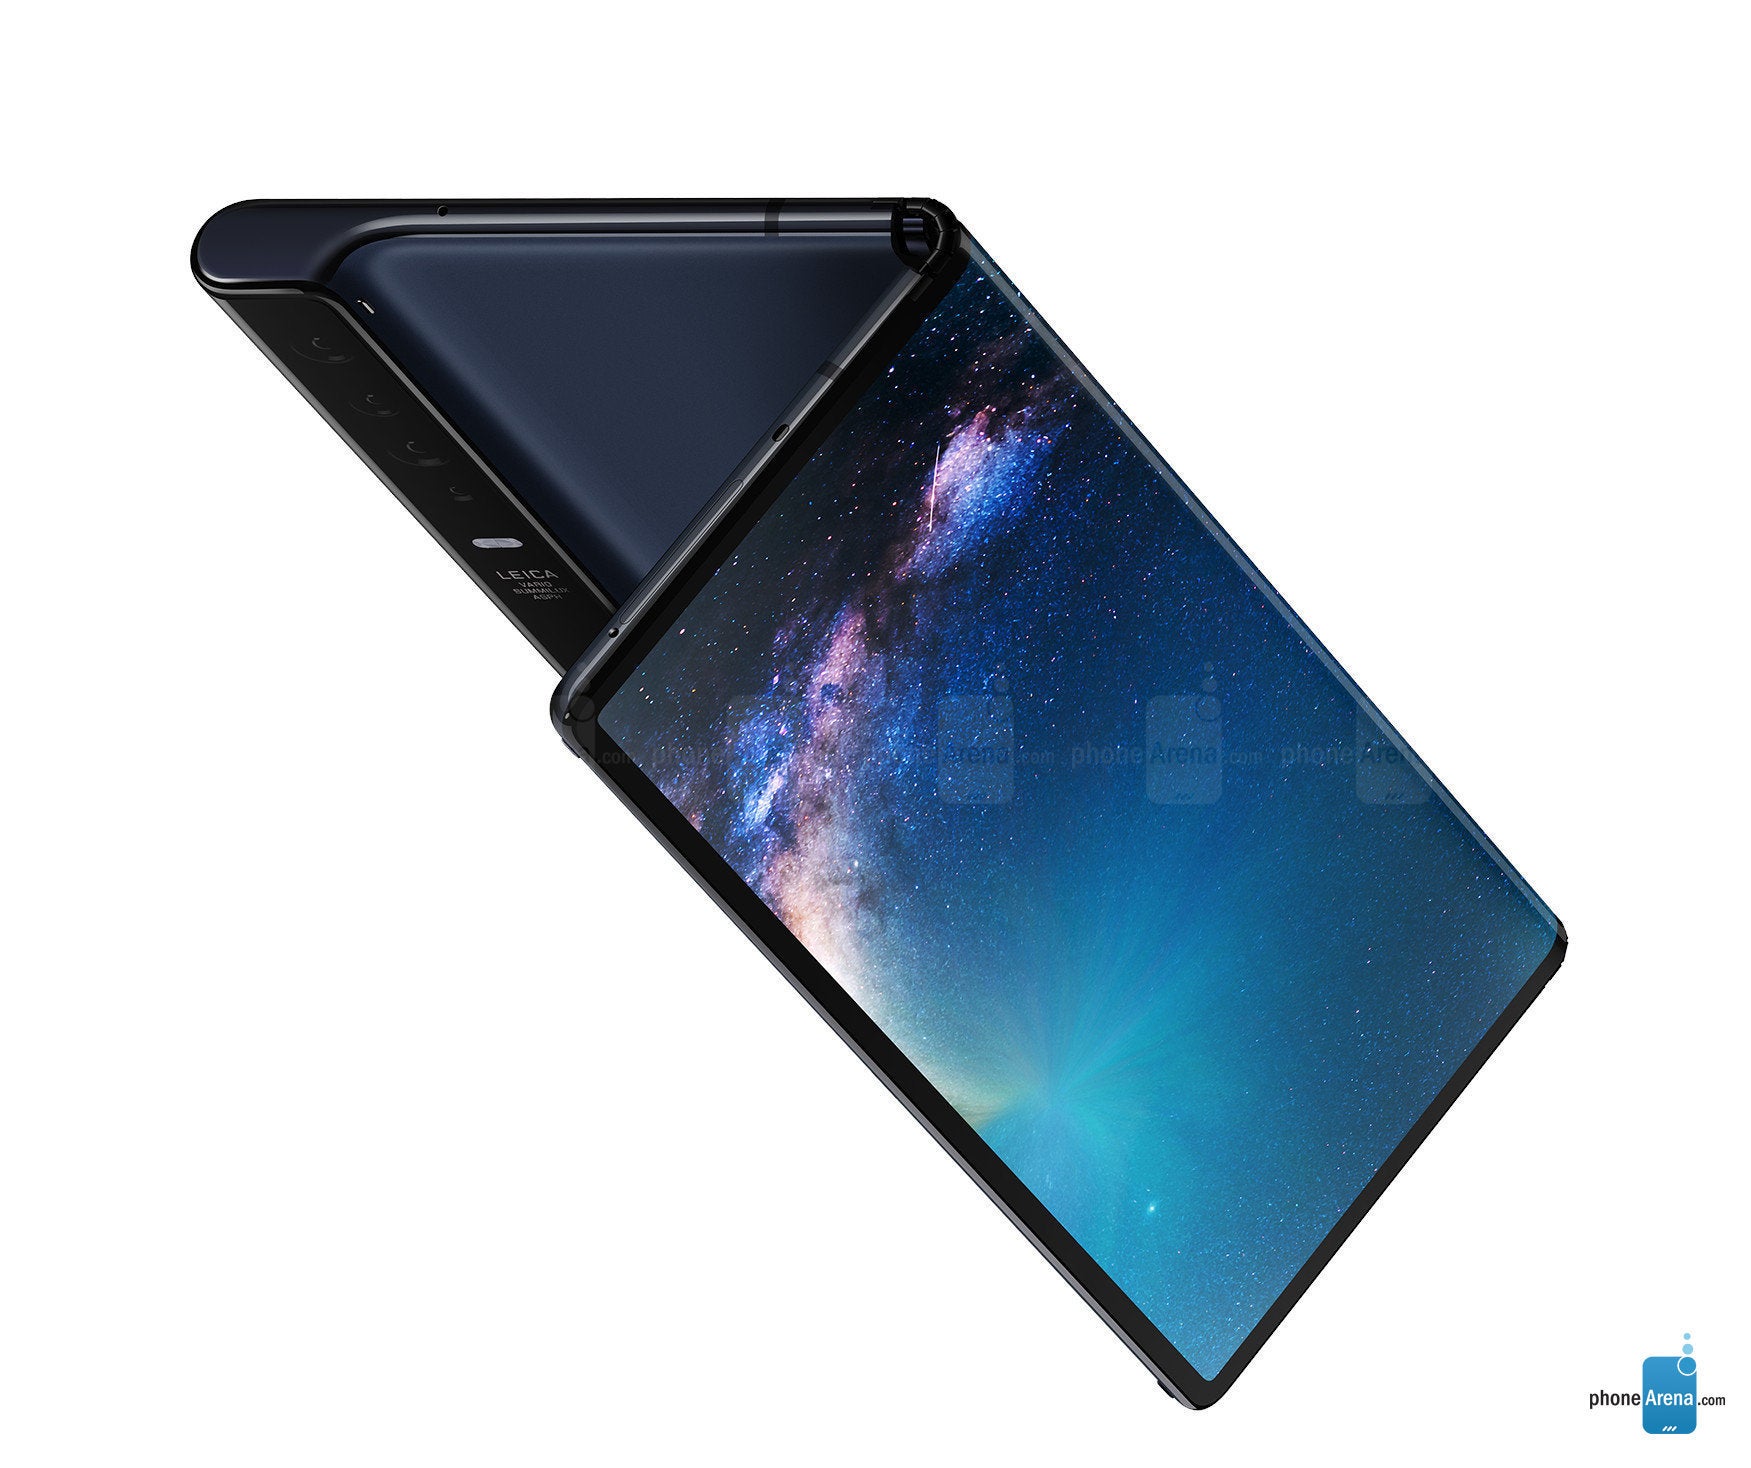 The foldable Huawei Mate X should launch with Android pre-installed - HongMengOS is "likely" faster than Android and iOS says Huawei founder and CEO